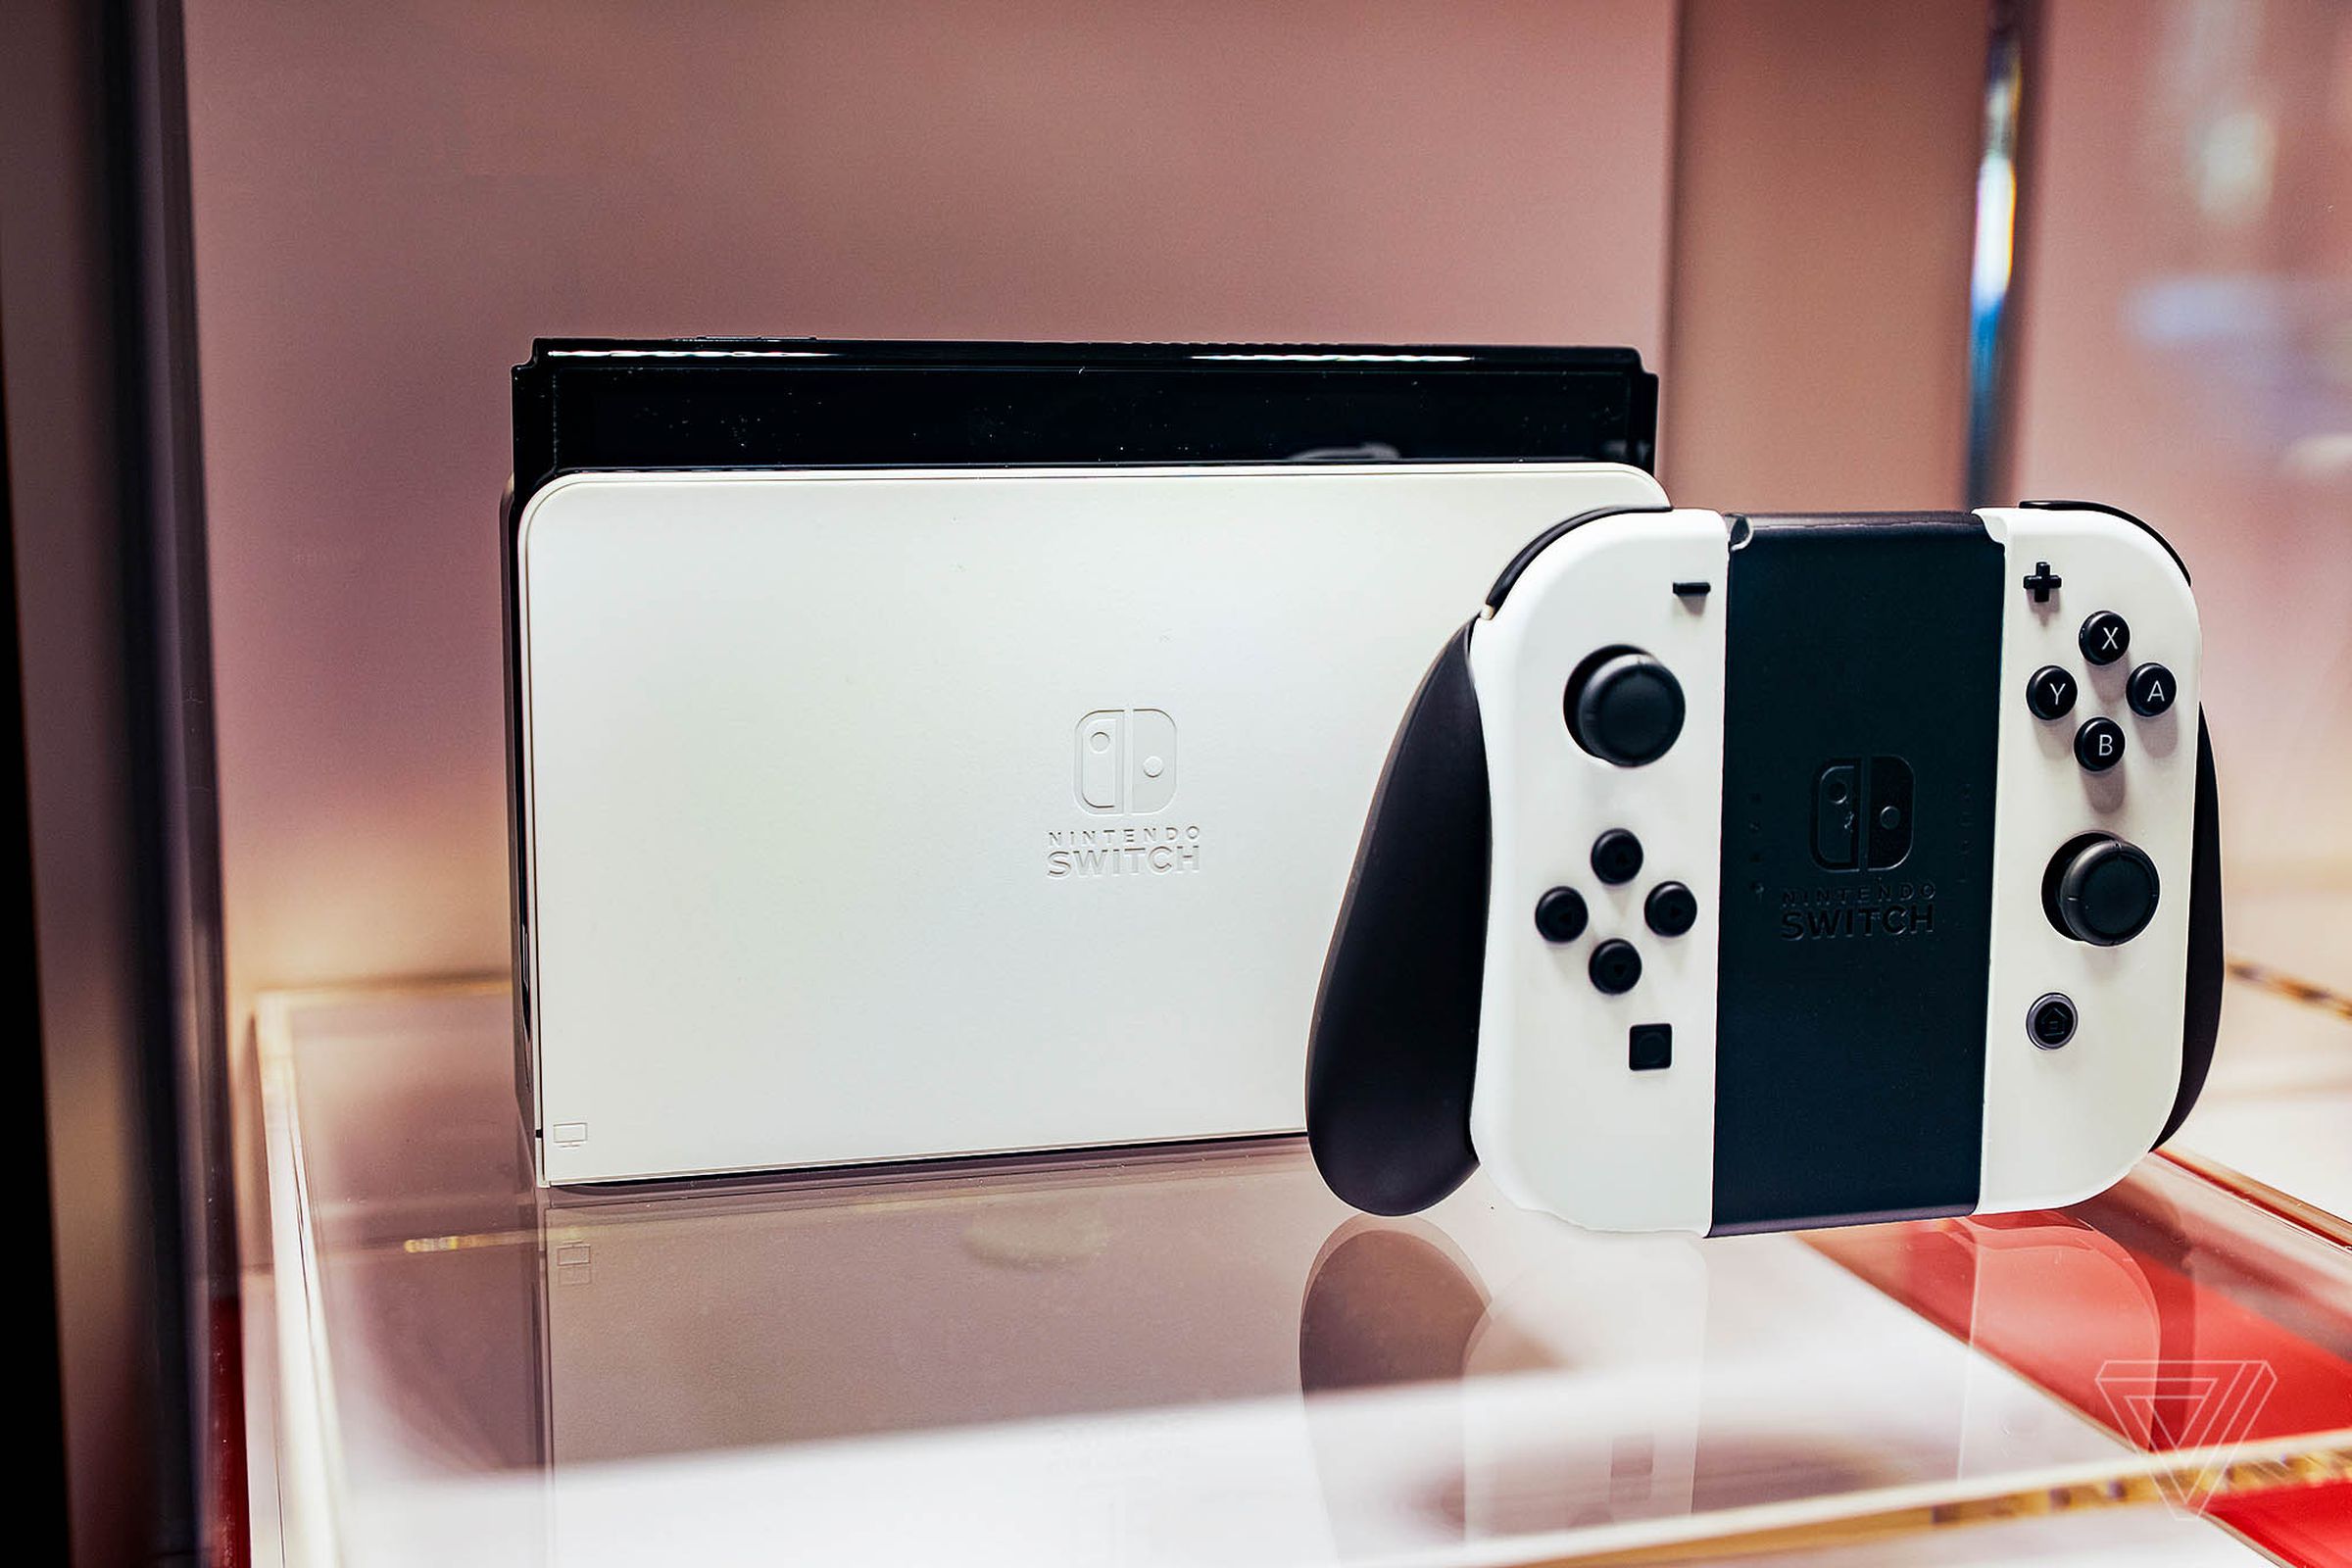 Nintendo’s upgraded Switch model sports a larger OLED display and slight redesign.